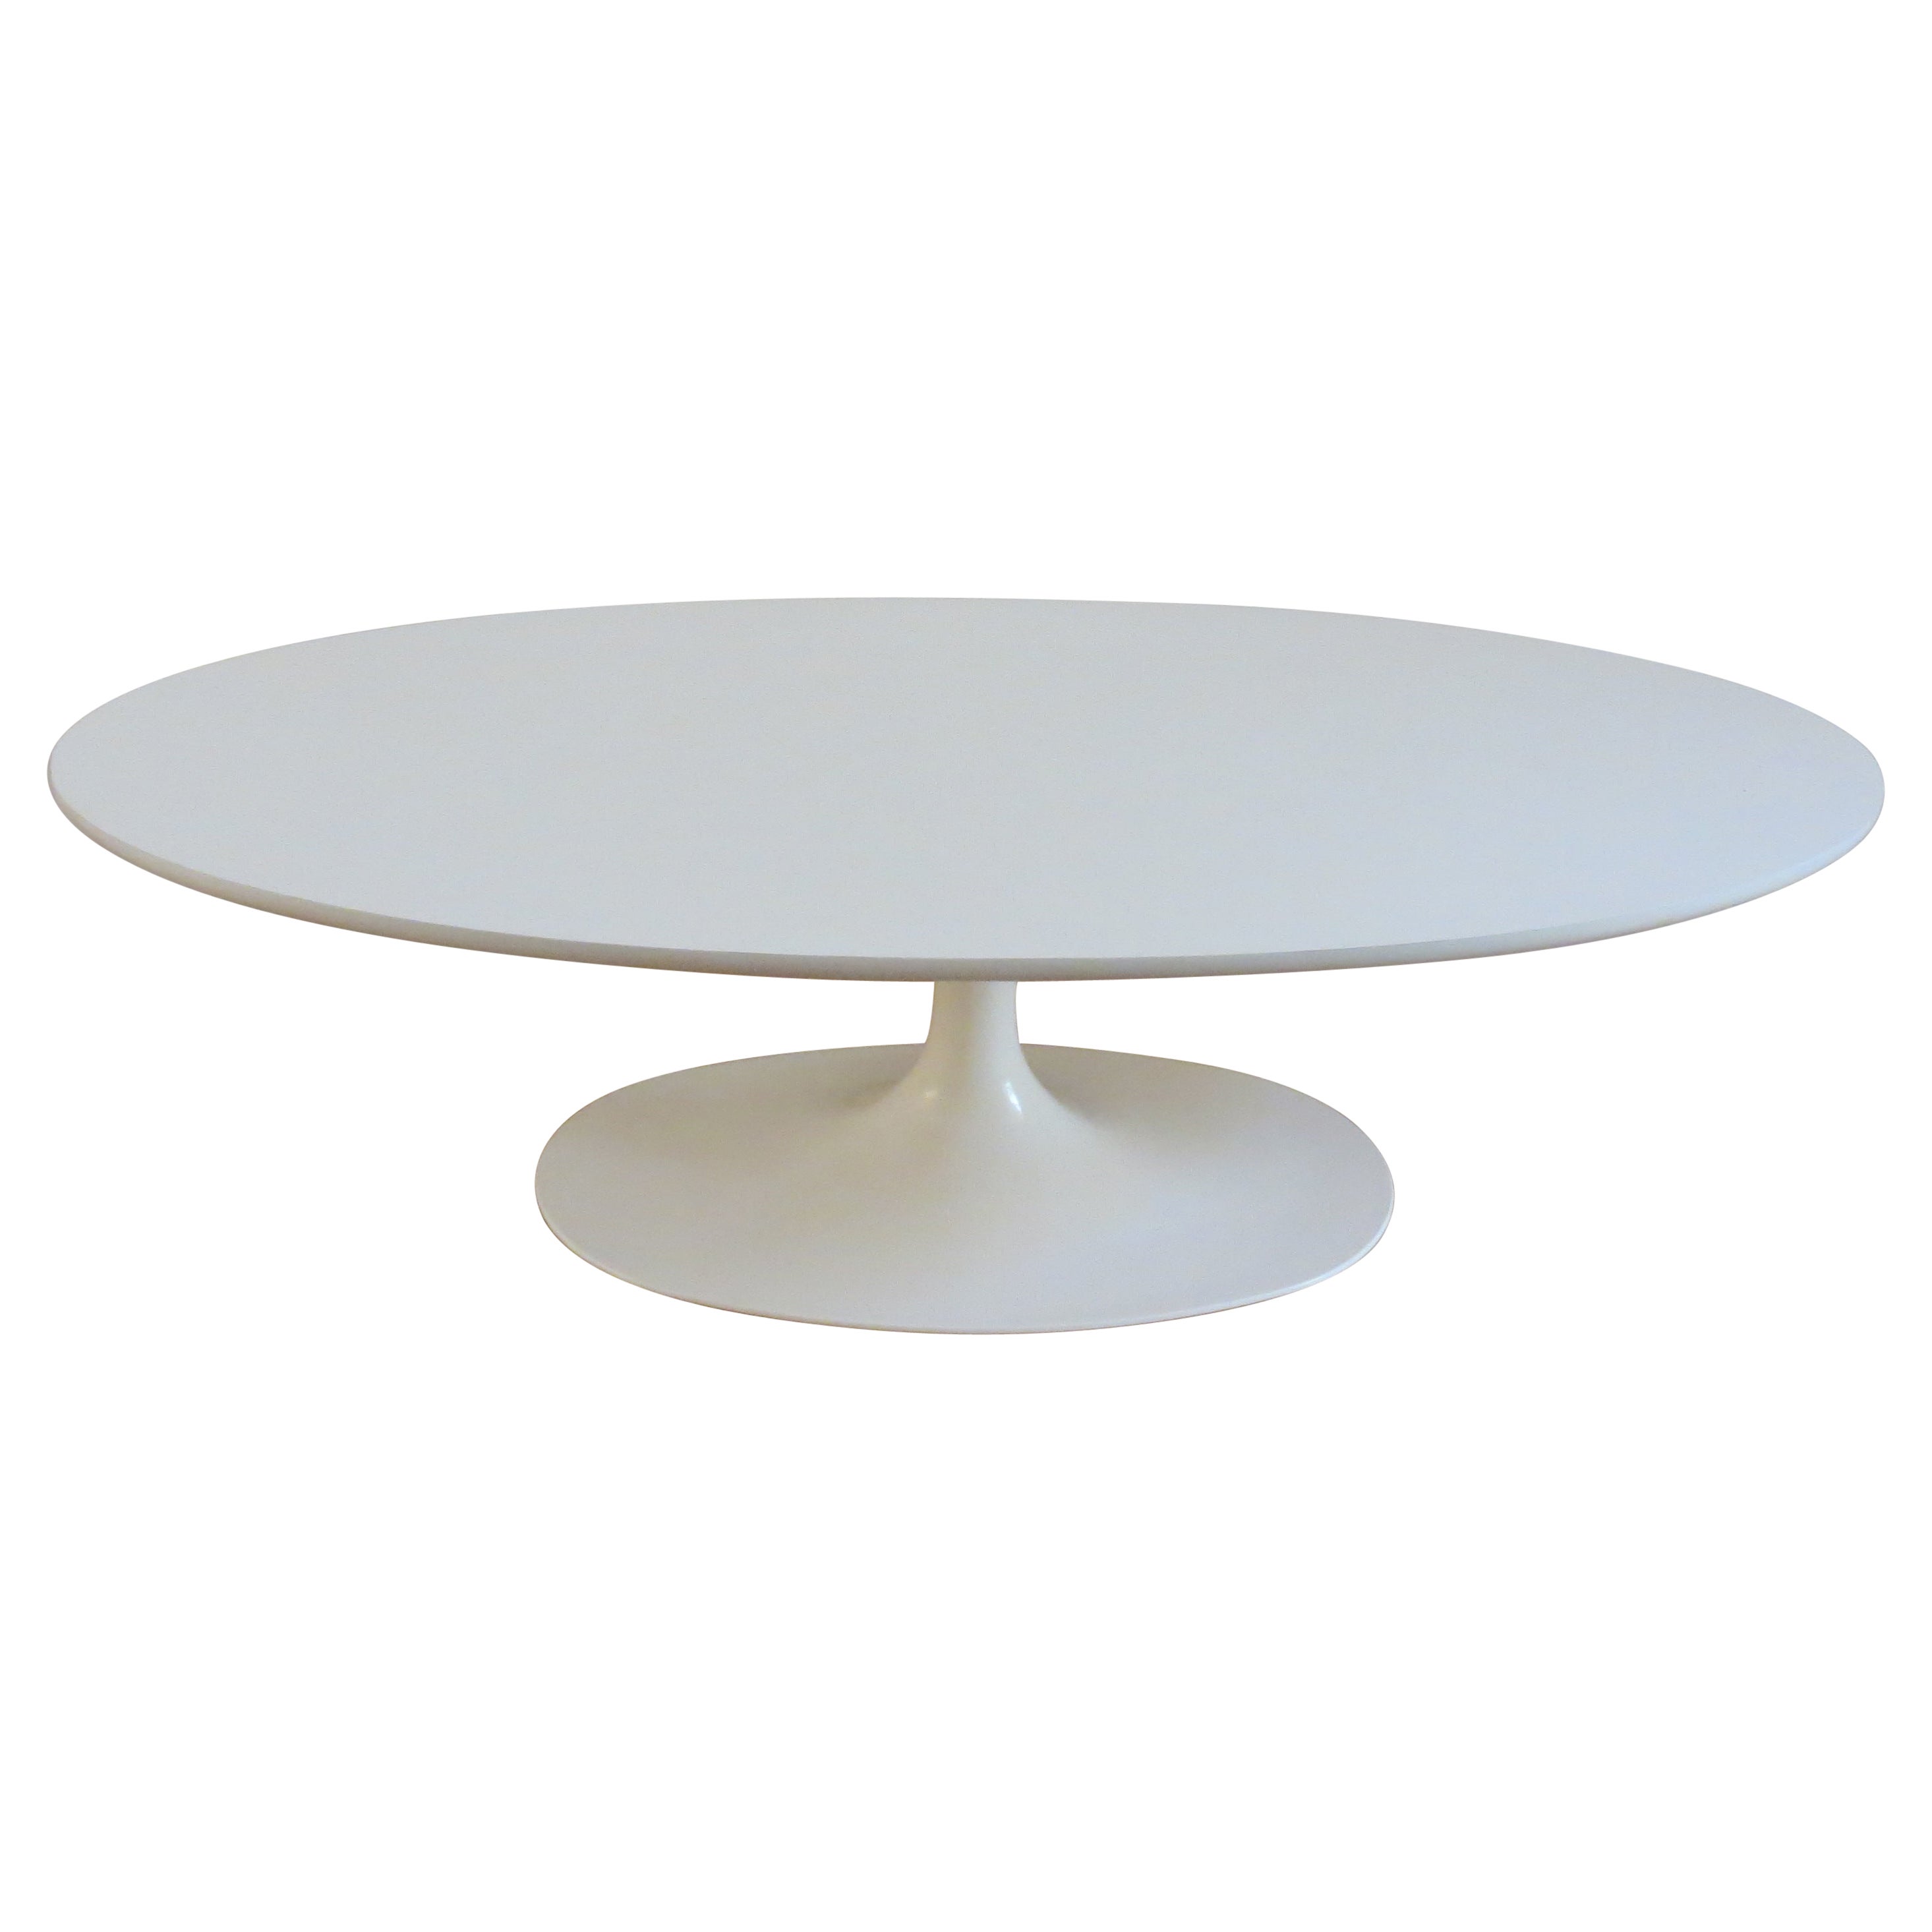 1960s White Oval Tulip Coffee Table by Maurice Burke for Arkana UK